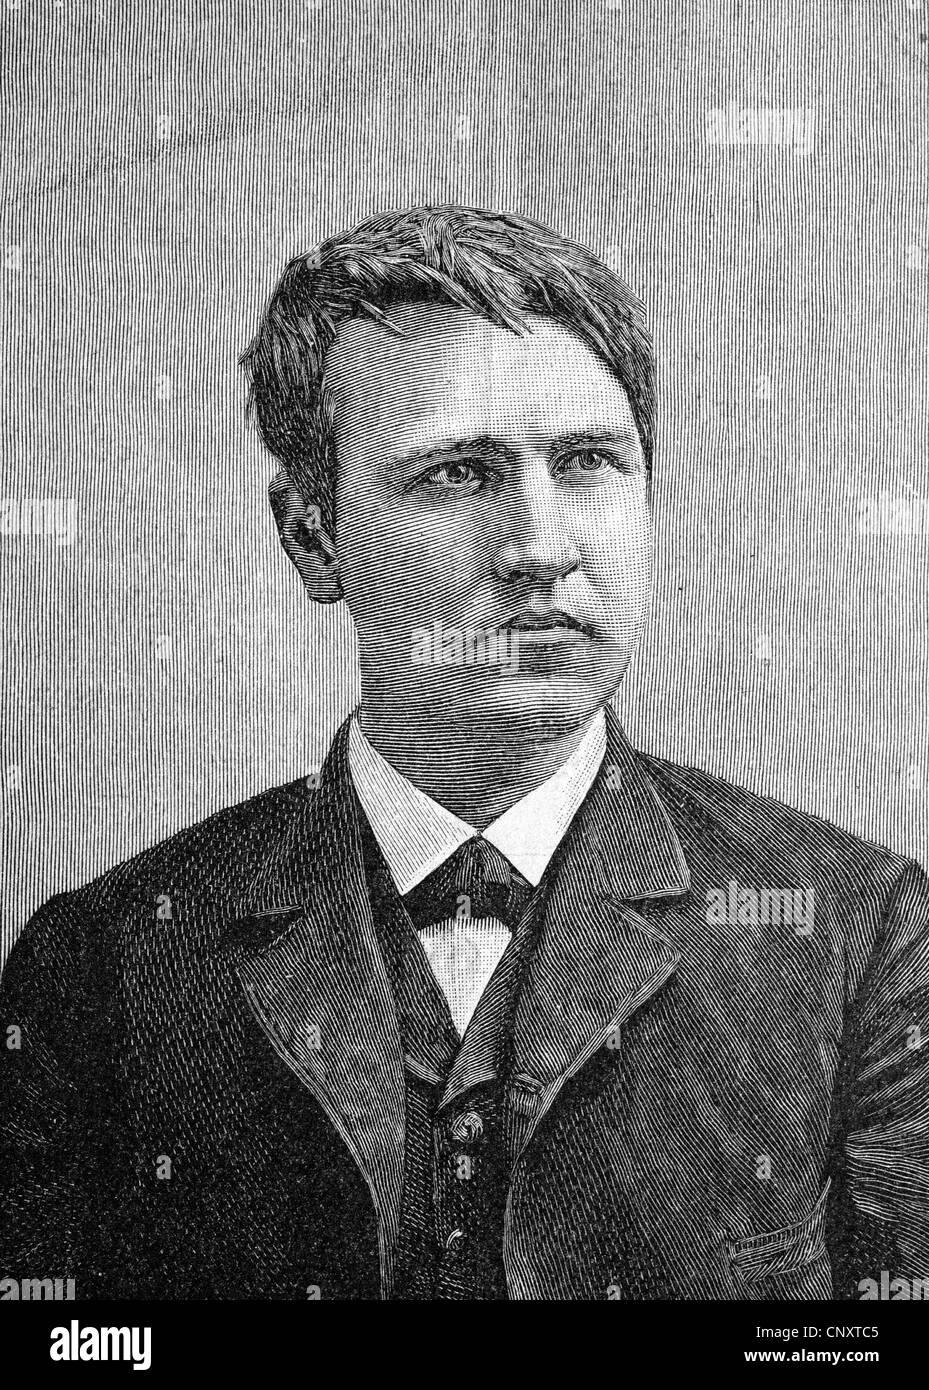 Thomas Alva Edison, 1847-1931, American inventor and entrepreneur with a focus on electricity and electrical engineering, histor Stock Photo